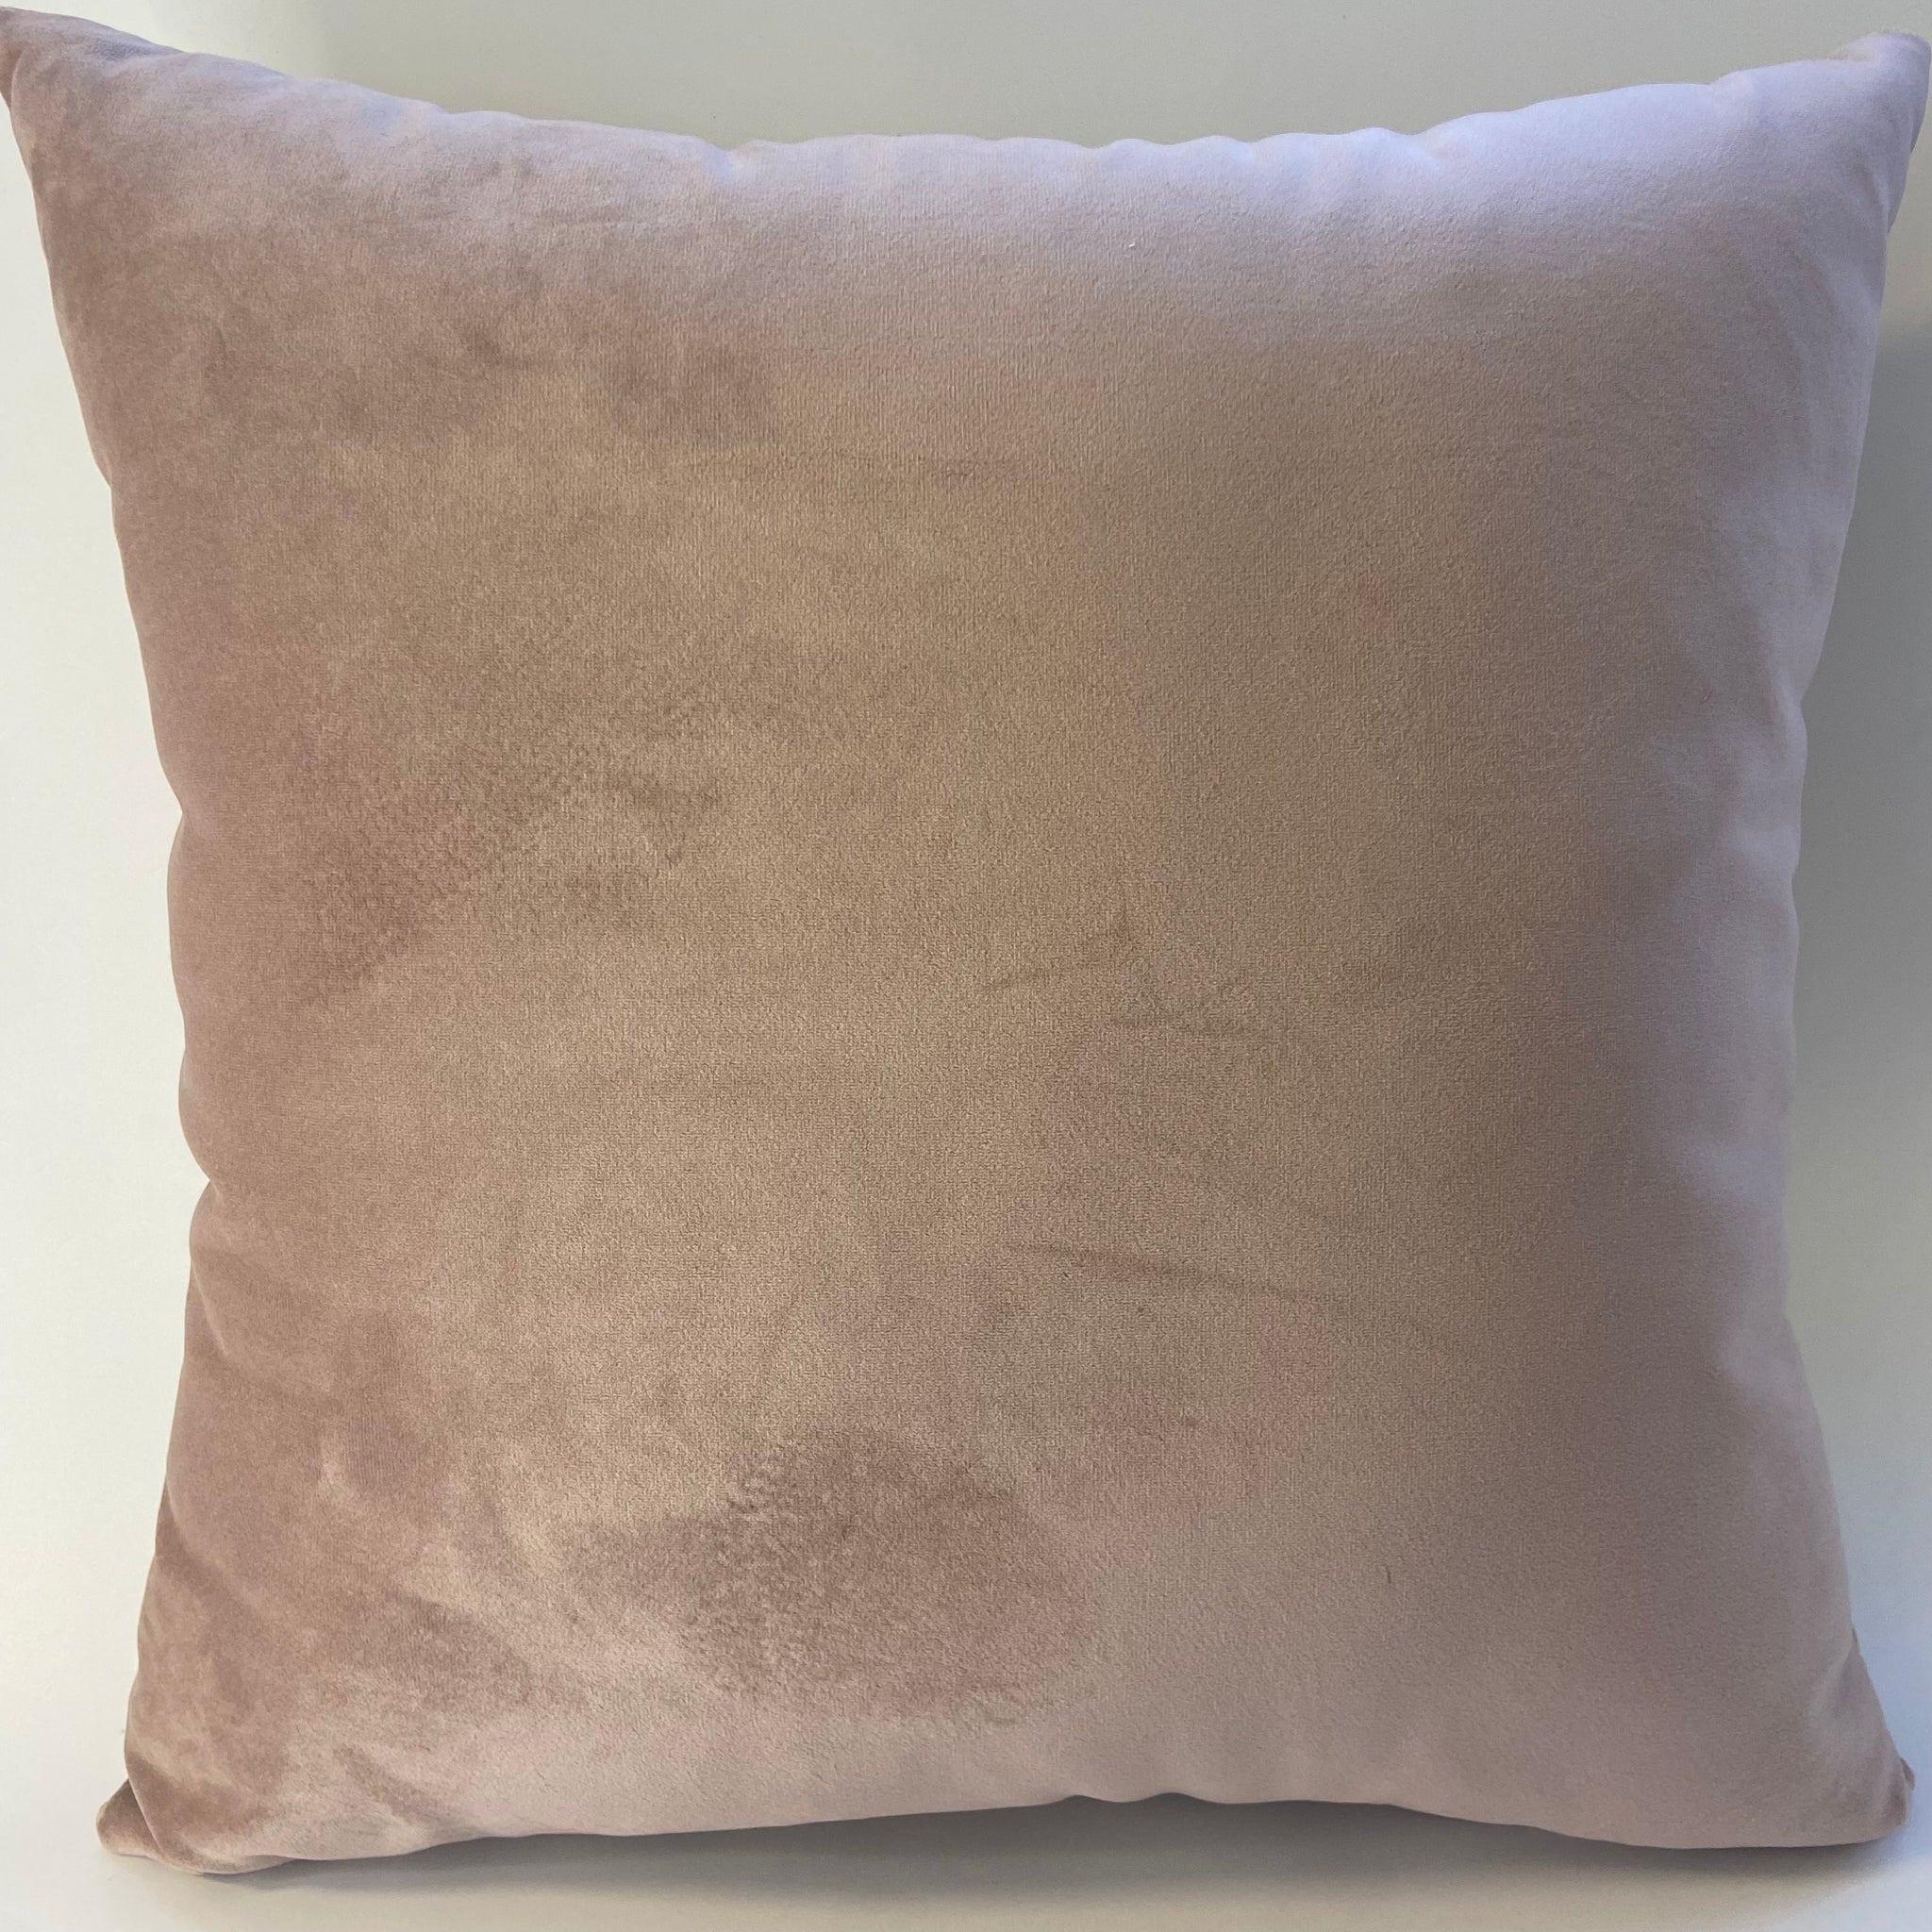 18" Dusty Rose Pillow